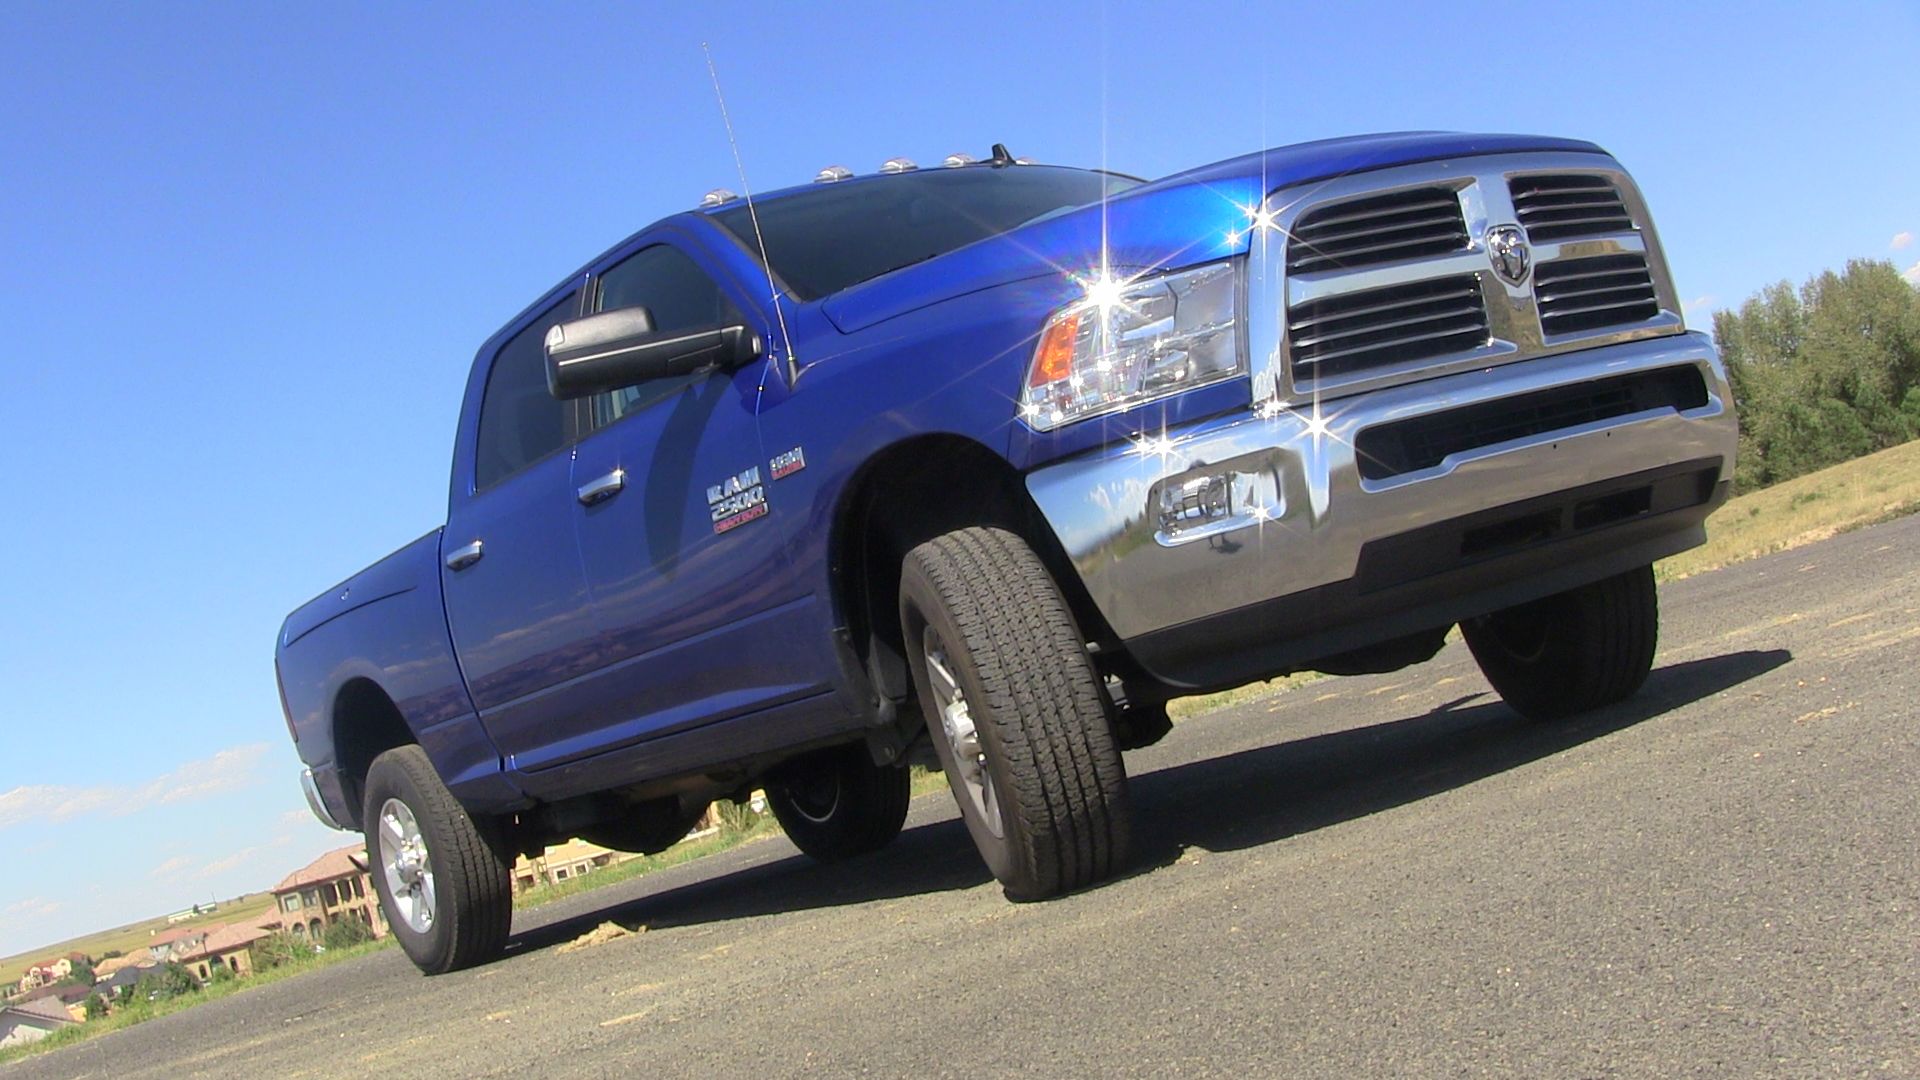 2014 Ram 2500 HD 6.4L Hemi - Delivering Promises? [Review] - The Fast